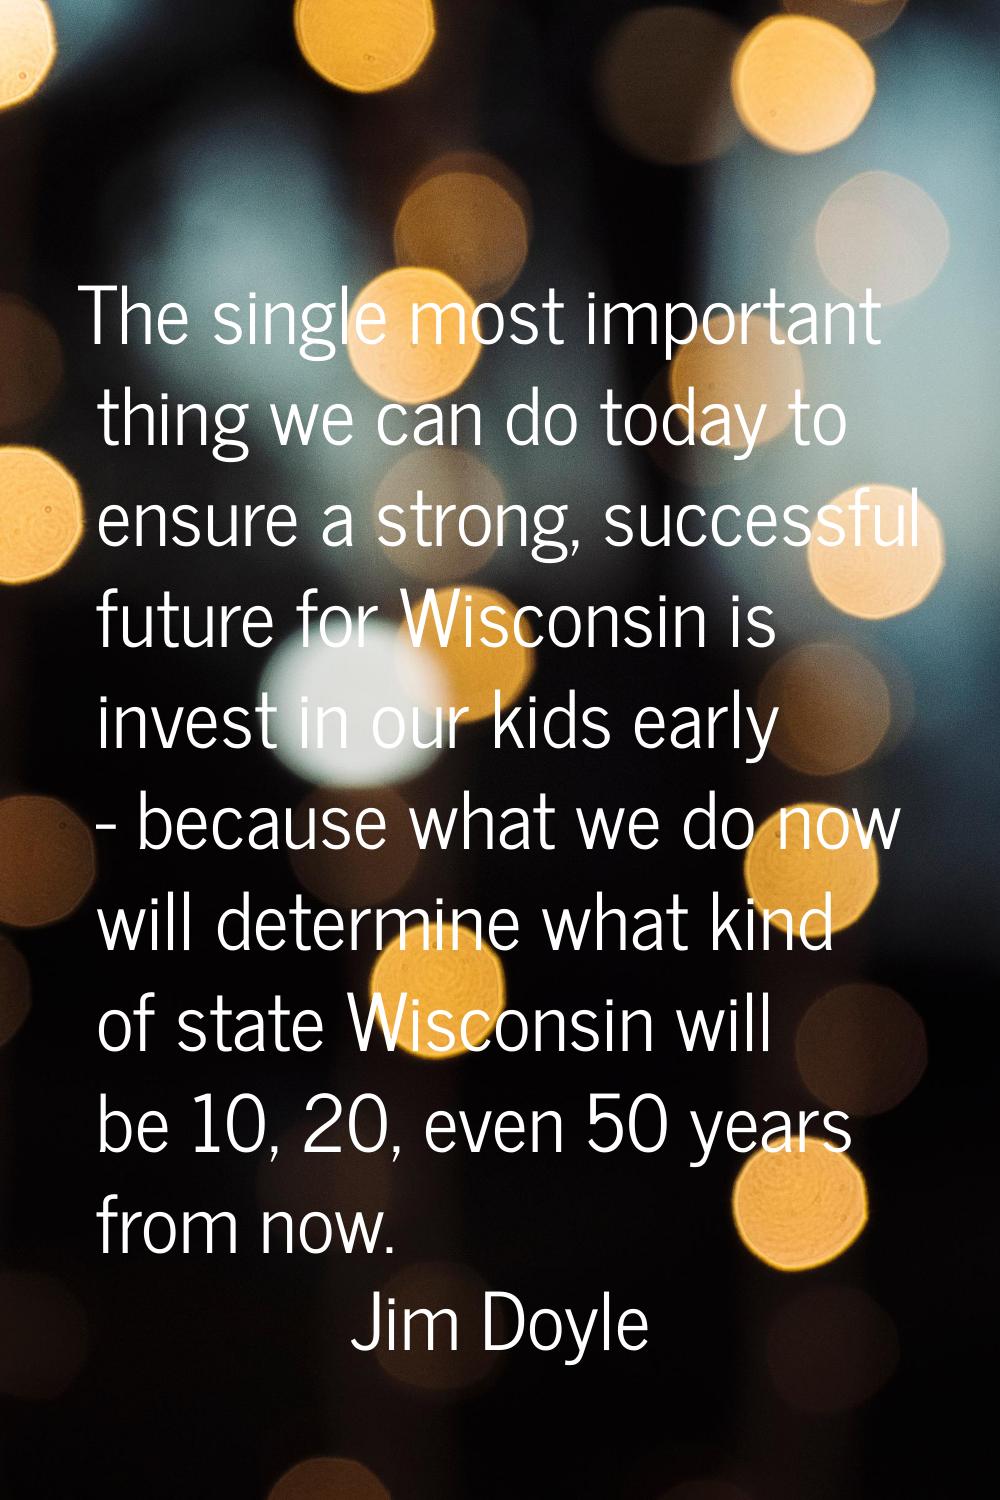 The single most important thing we can do today to ensure a strong, successful future for Wisconsin